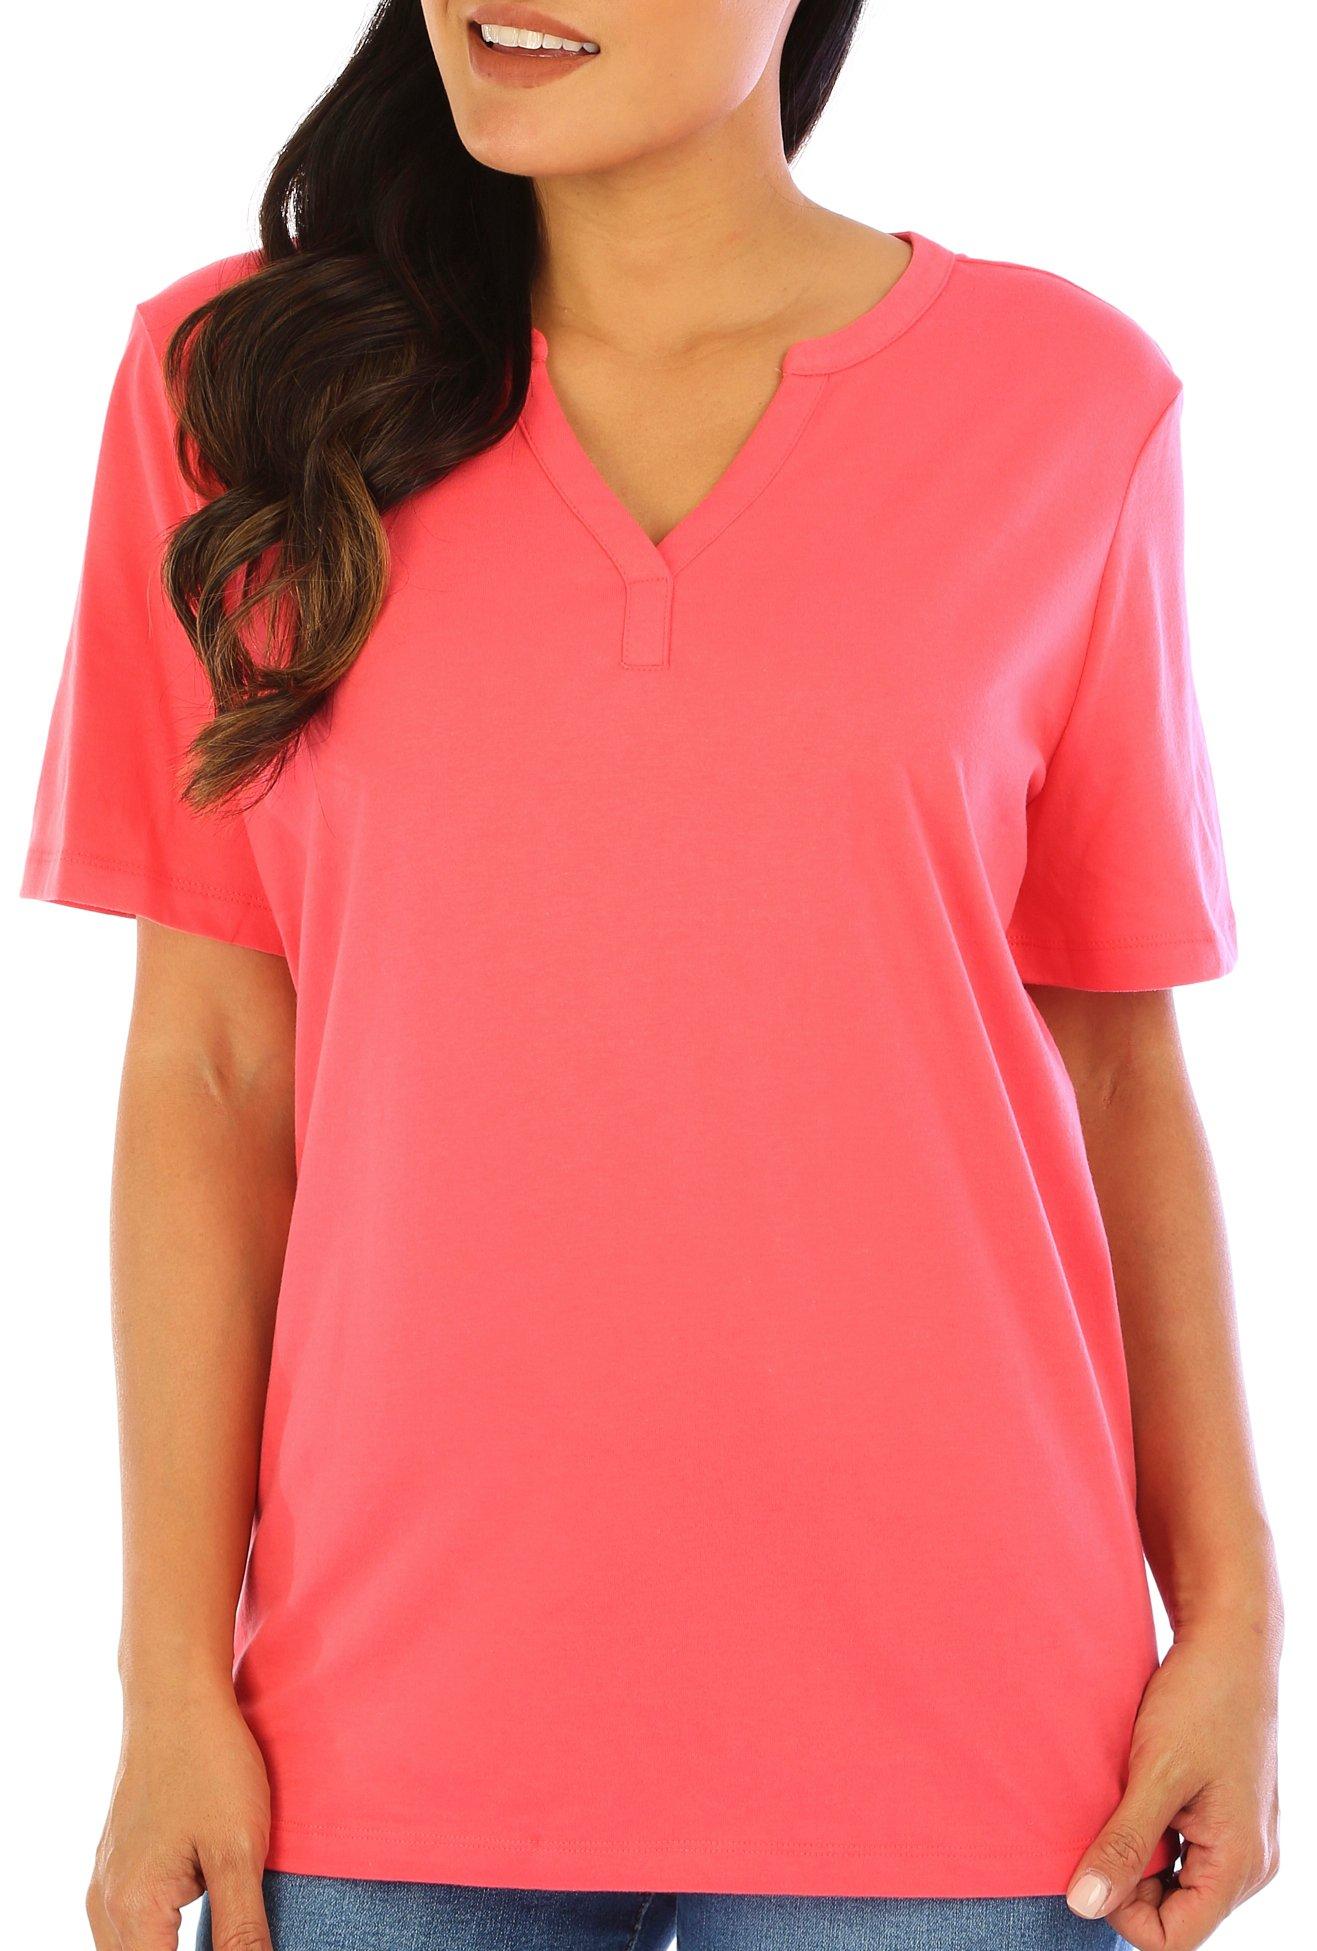 Womens Solid Henley Style Short Sleeve Top